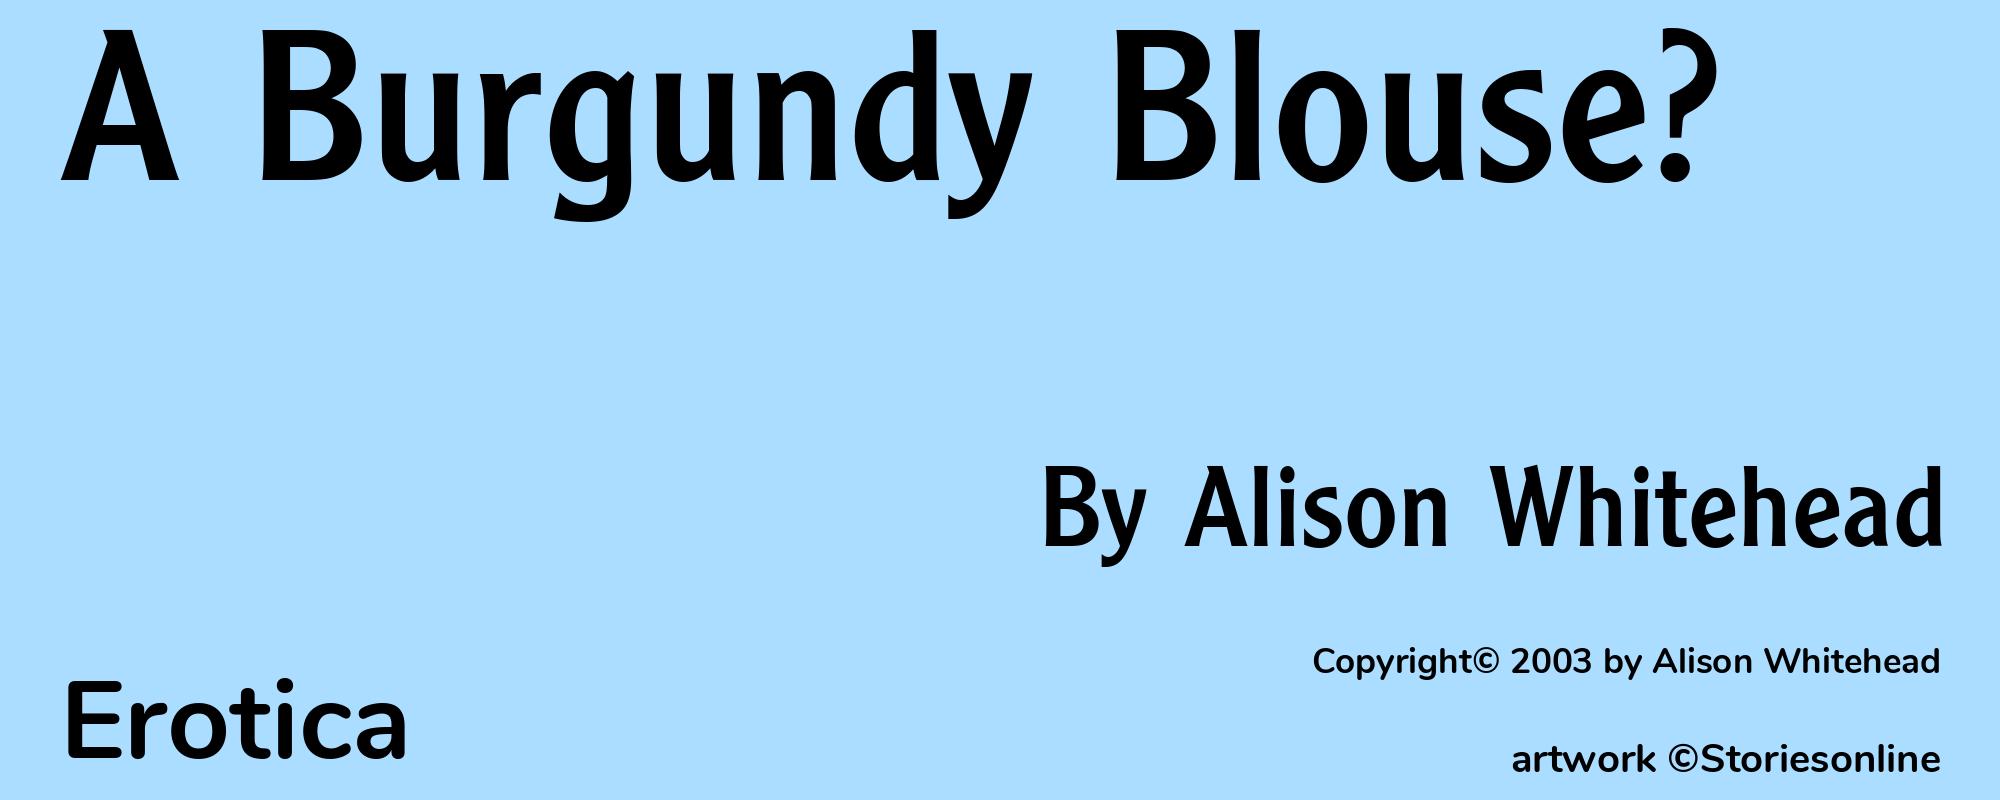 A Burgundy Blouse? - Cover